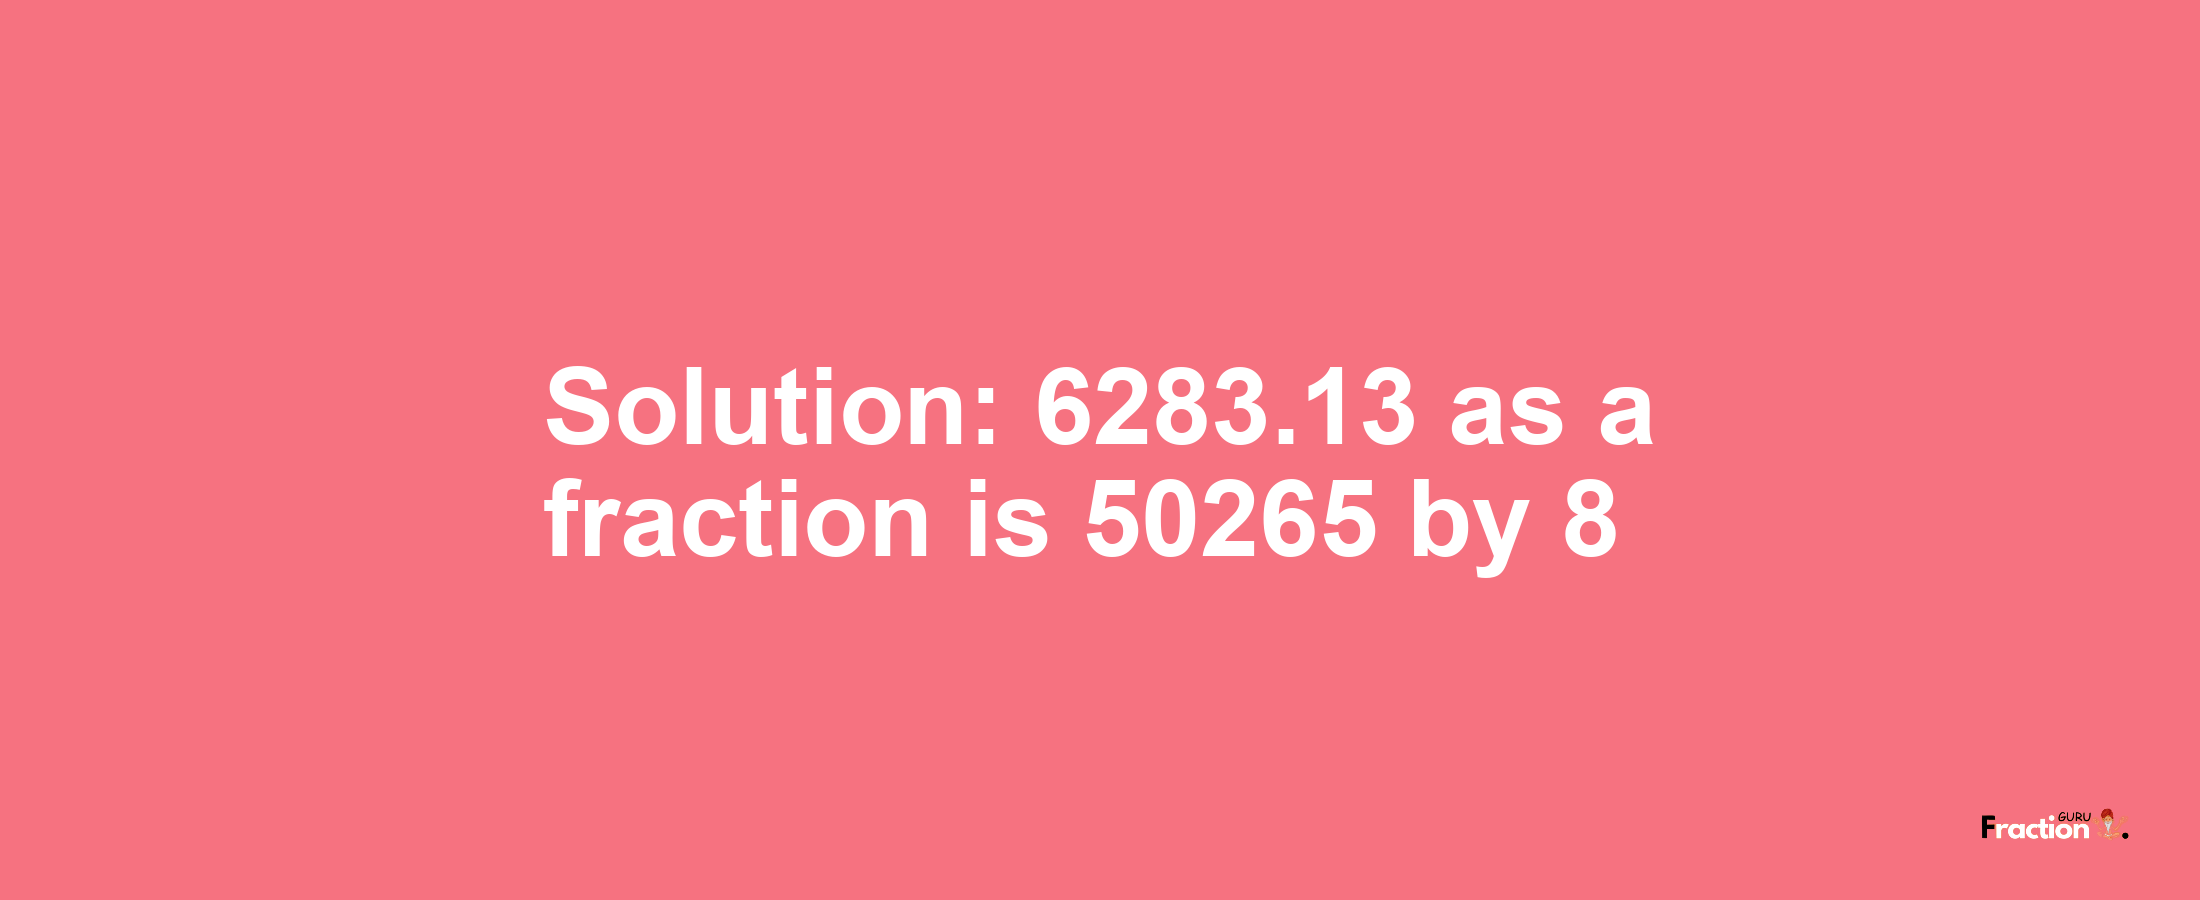 Solution:6283.13 as a fraction is 50265/8